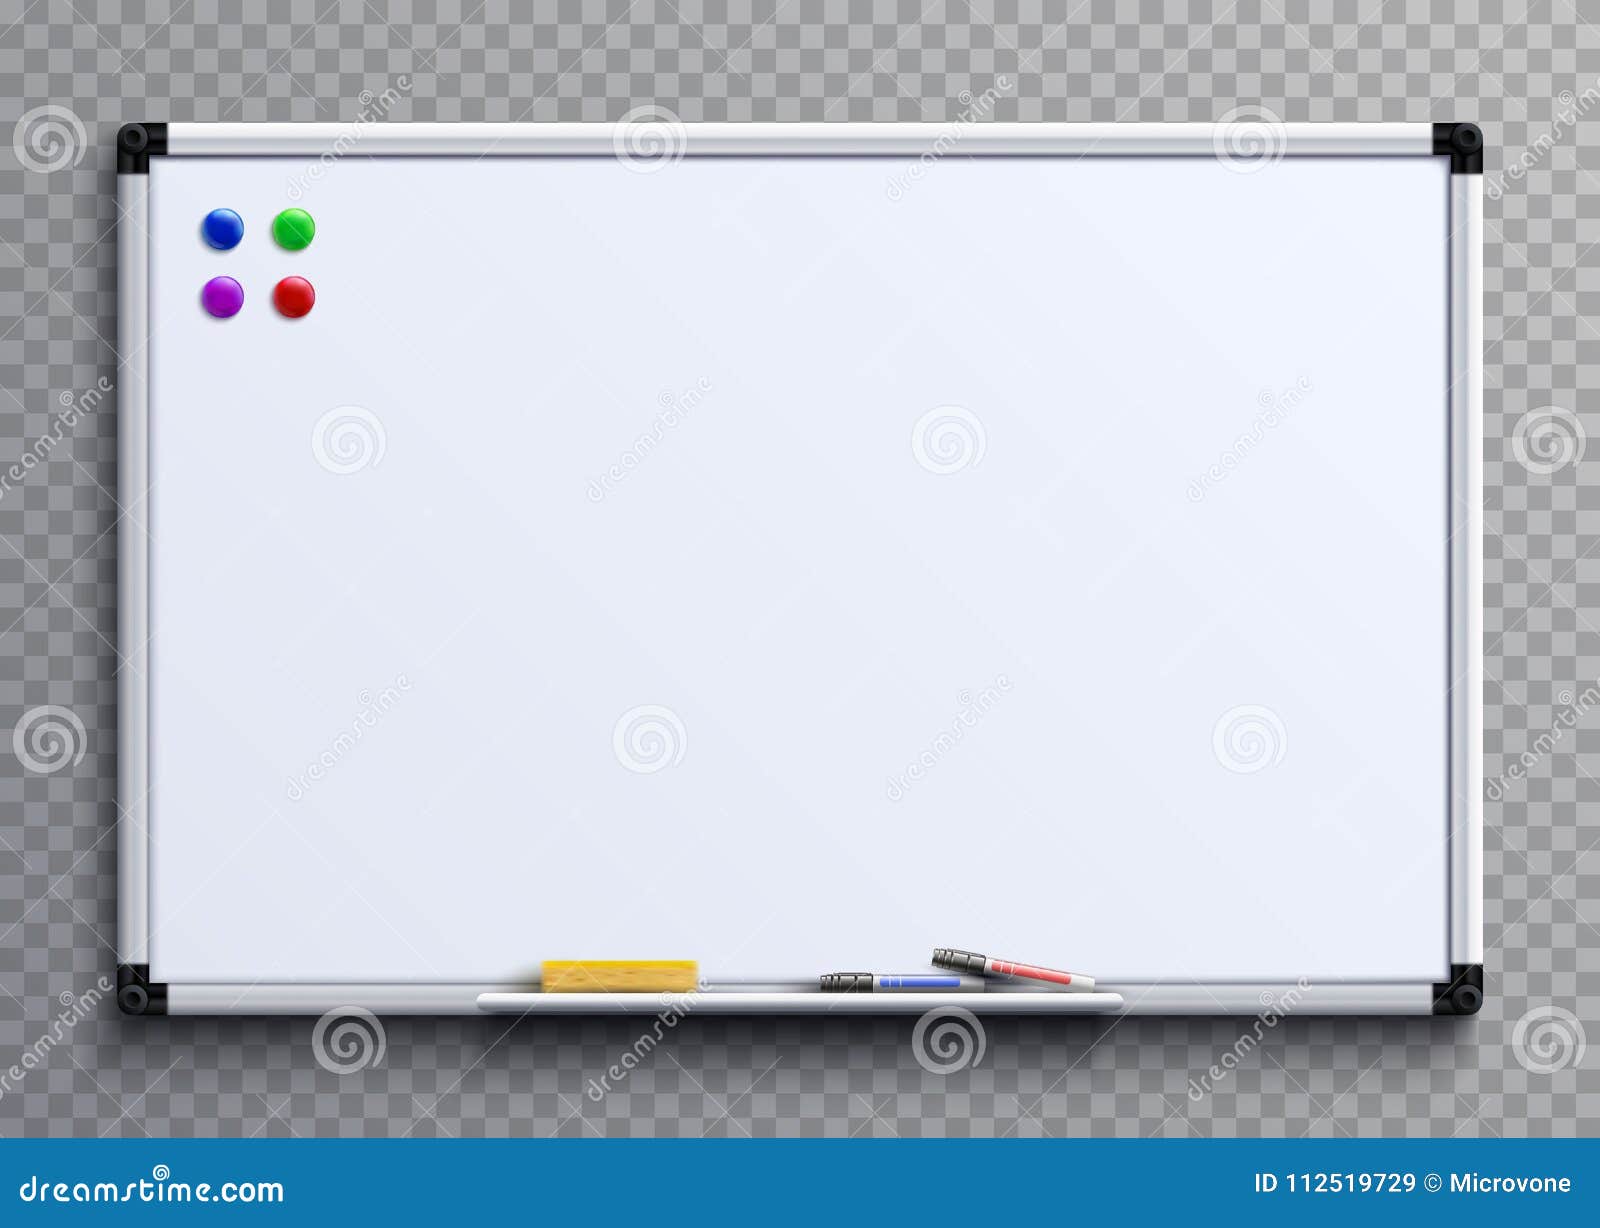 Download Empty Whiteboard With Marker Pens And Magnets. Business ...